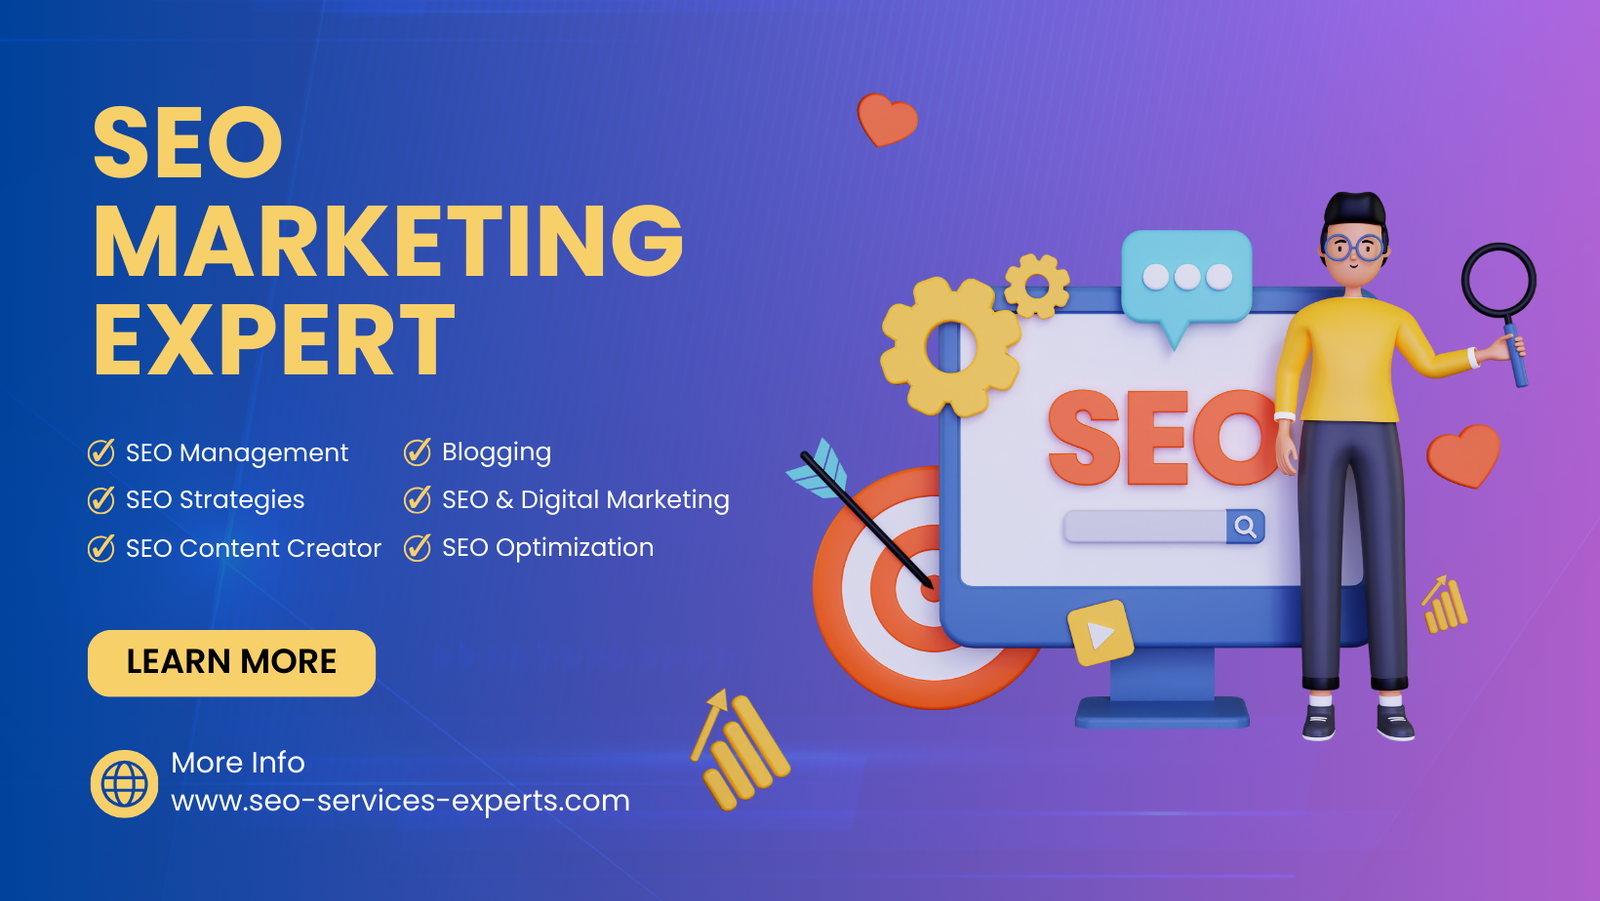 SEO Services In Dubai UAE : ROI Based SEO Services : Increase organic visibility, quality traffic & sales of your online business. SEO-Services-Experts.com is a local SEO Dubai agency based in the United Arab Emirates, offers high end Search Engine Optimization services in Dubai, UAE.